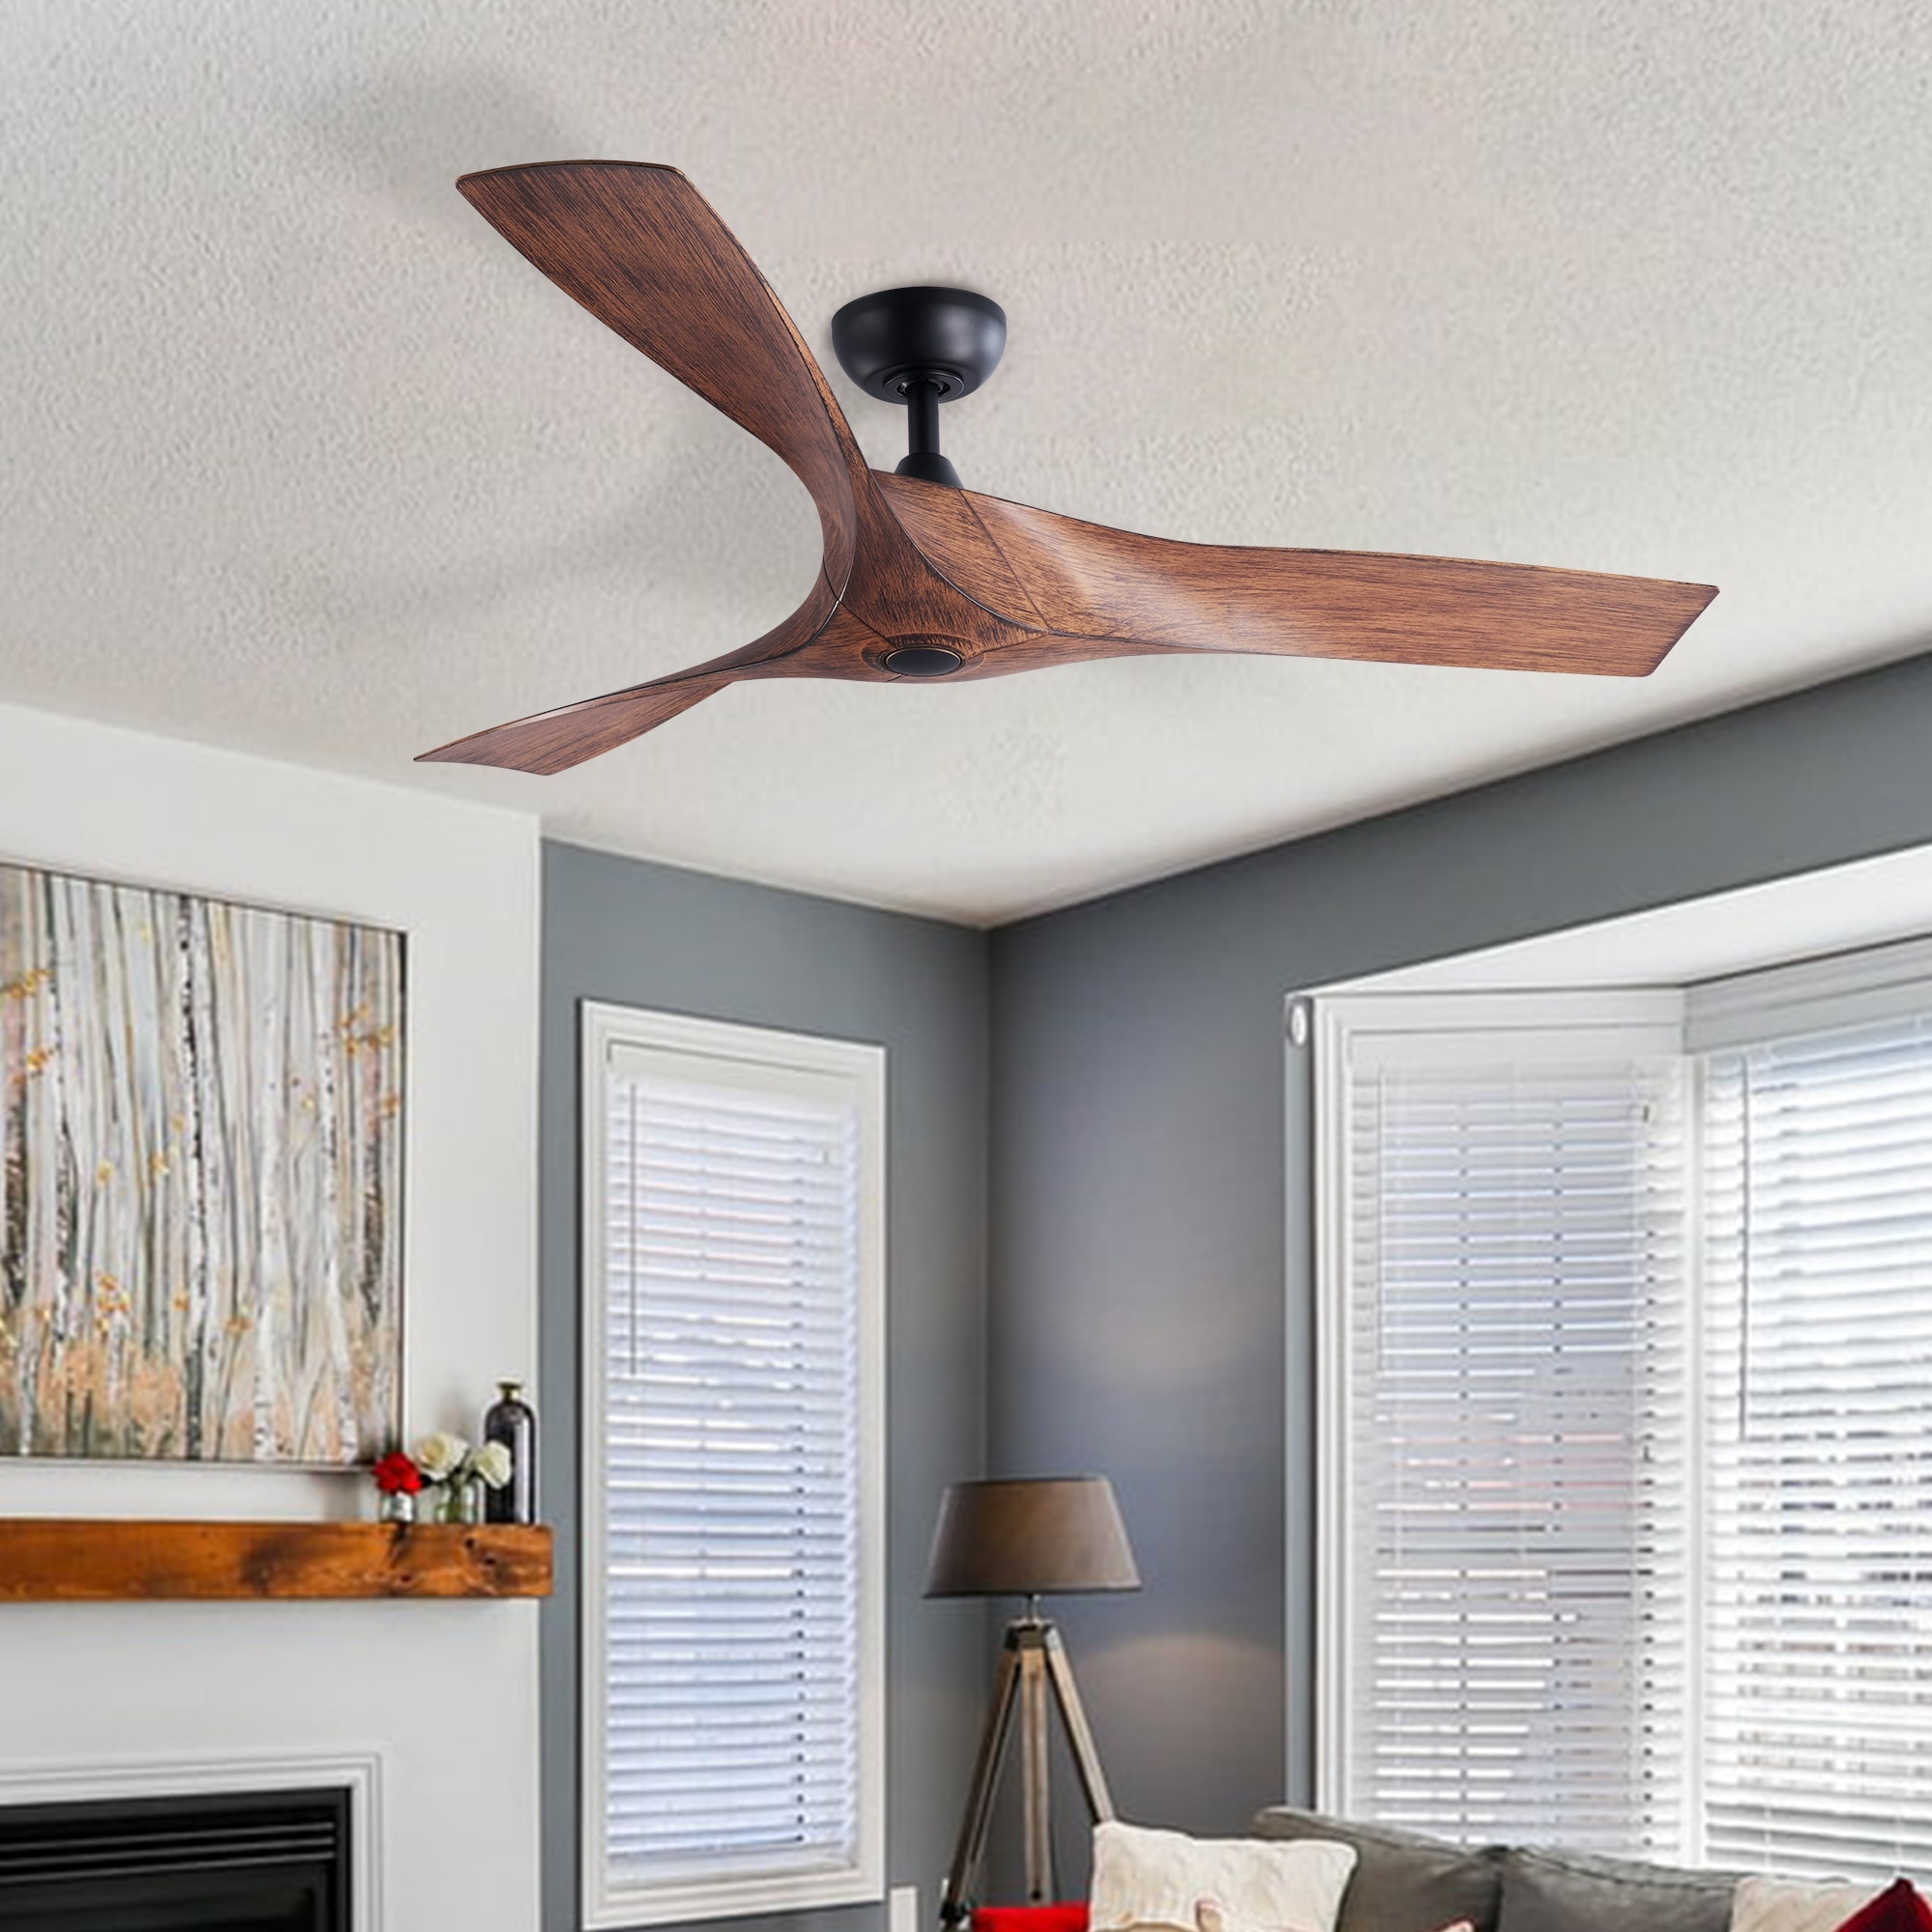 How Long Are The Blades On A 52 Inch Ceiling Fan